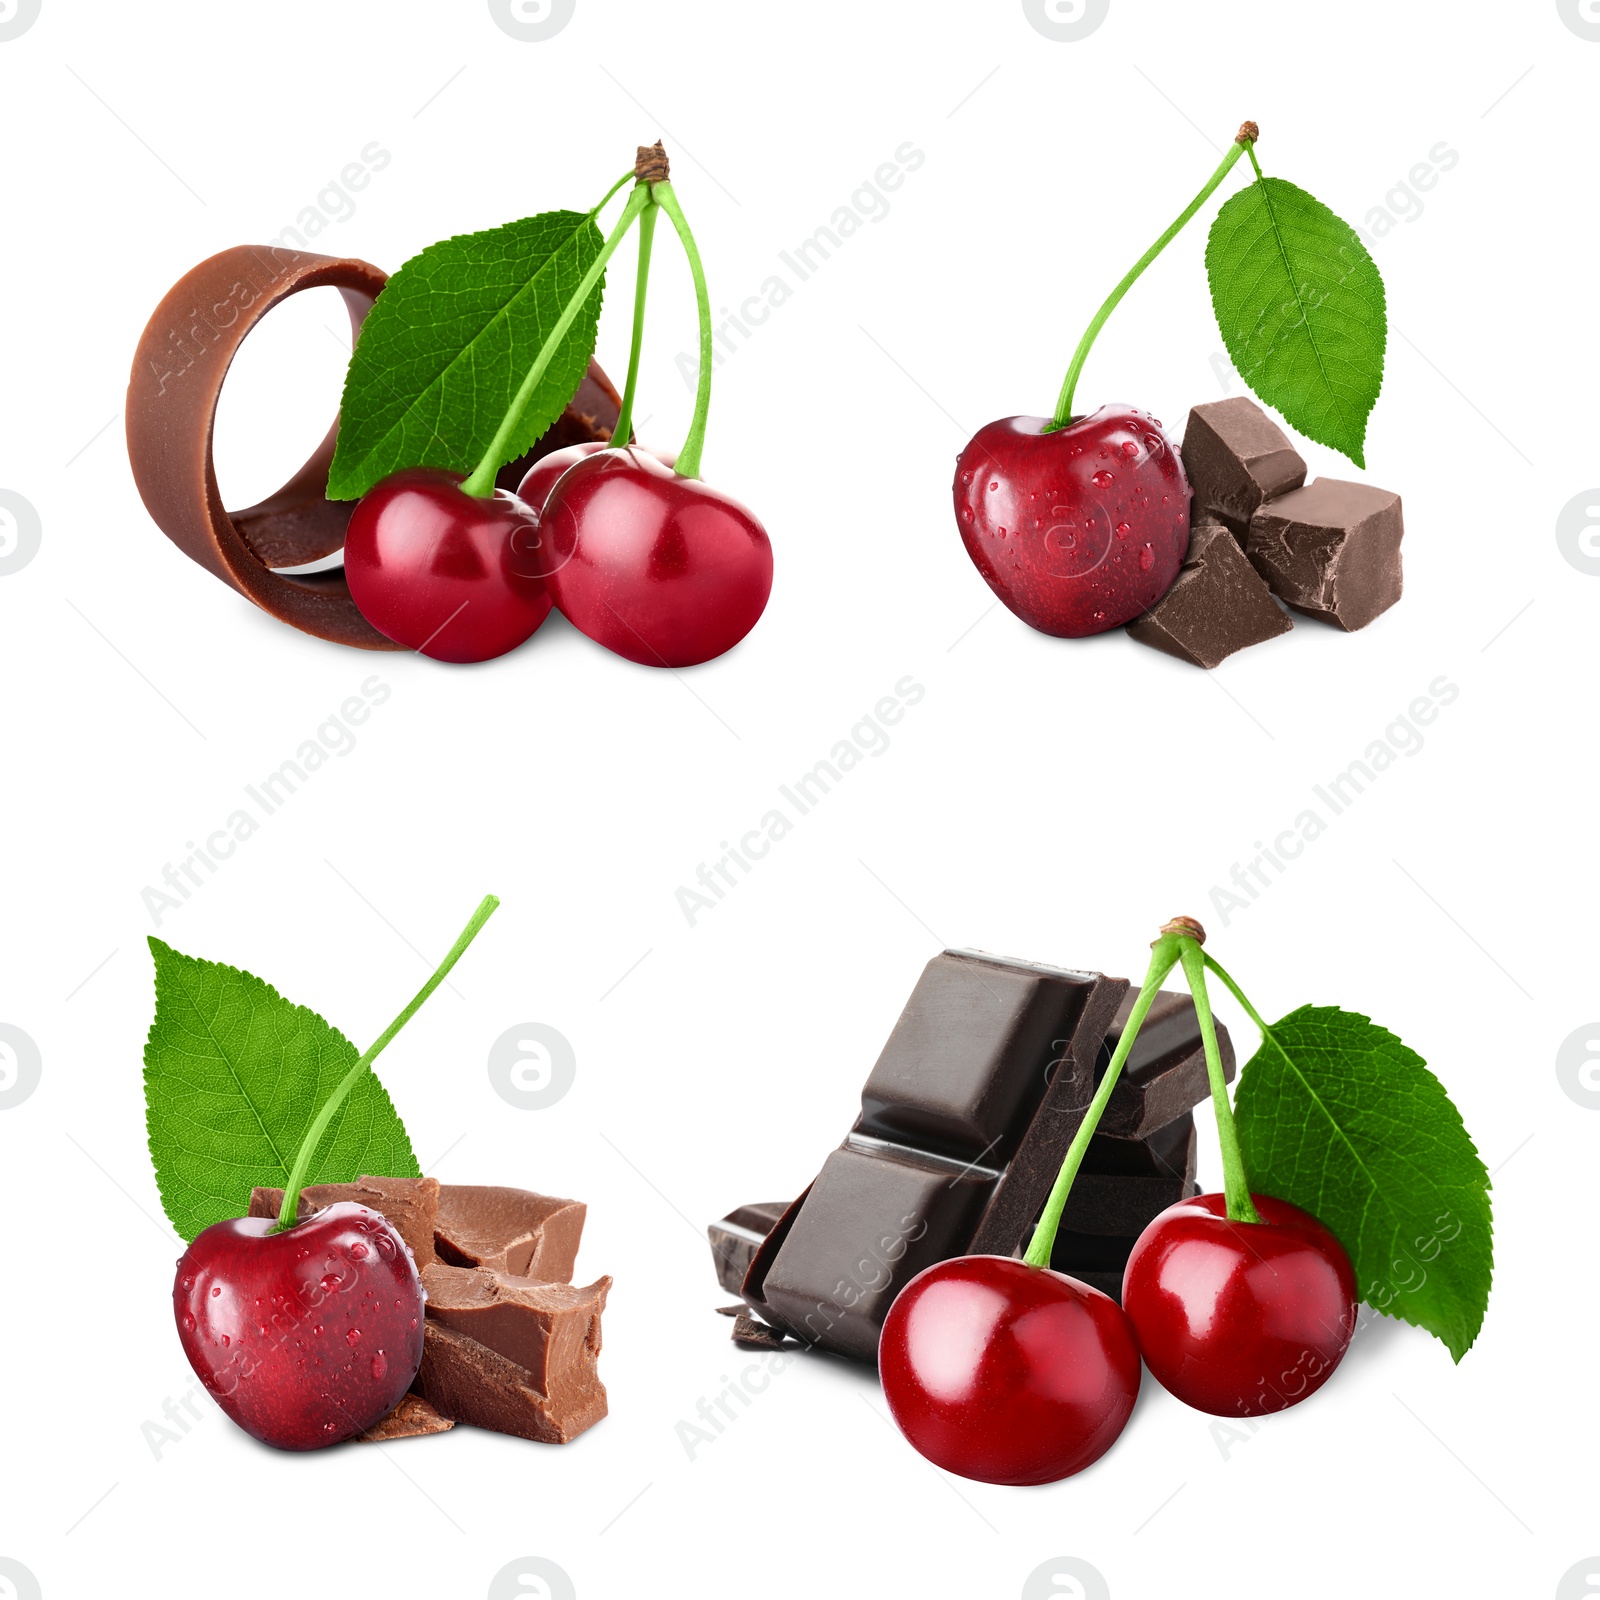 Image of Fresh cherries, pieces and curls of chocolate isolated on white, collage